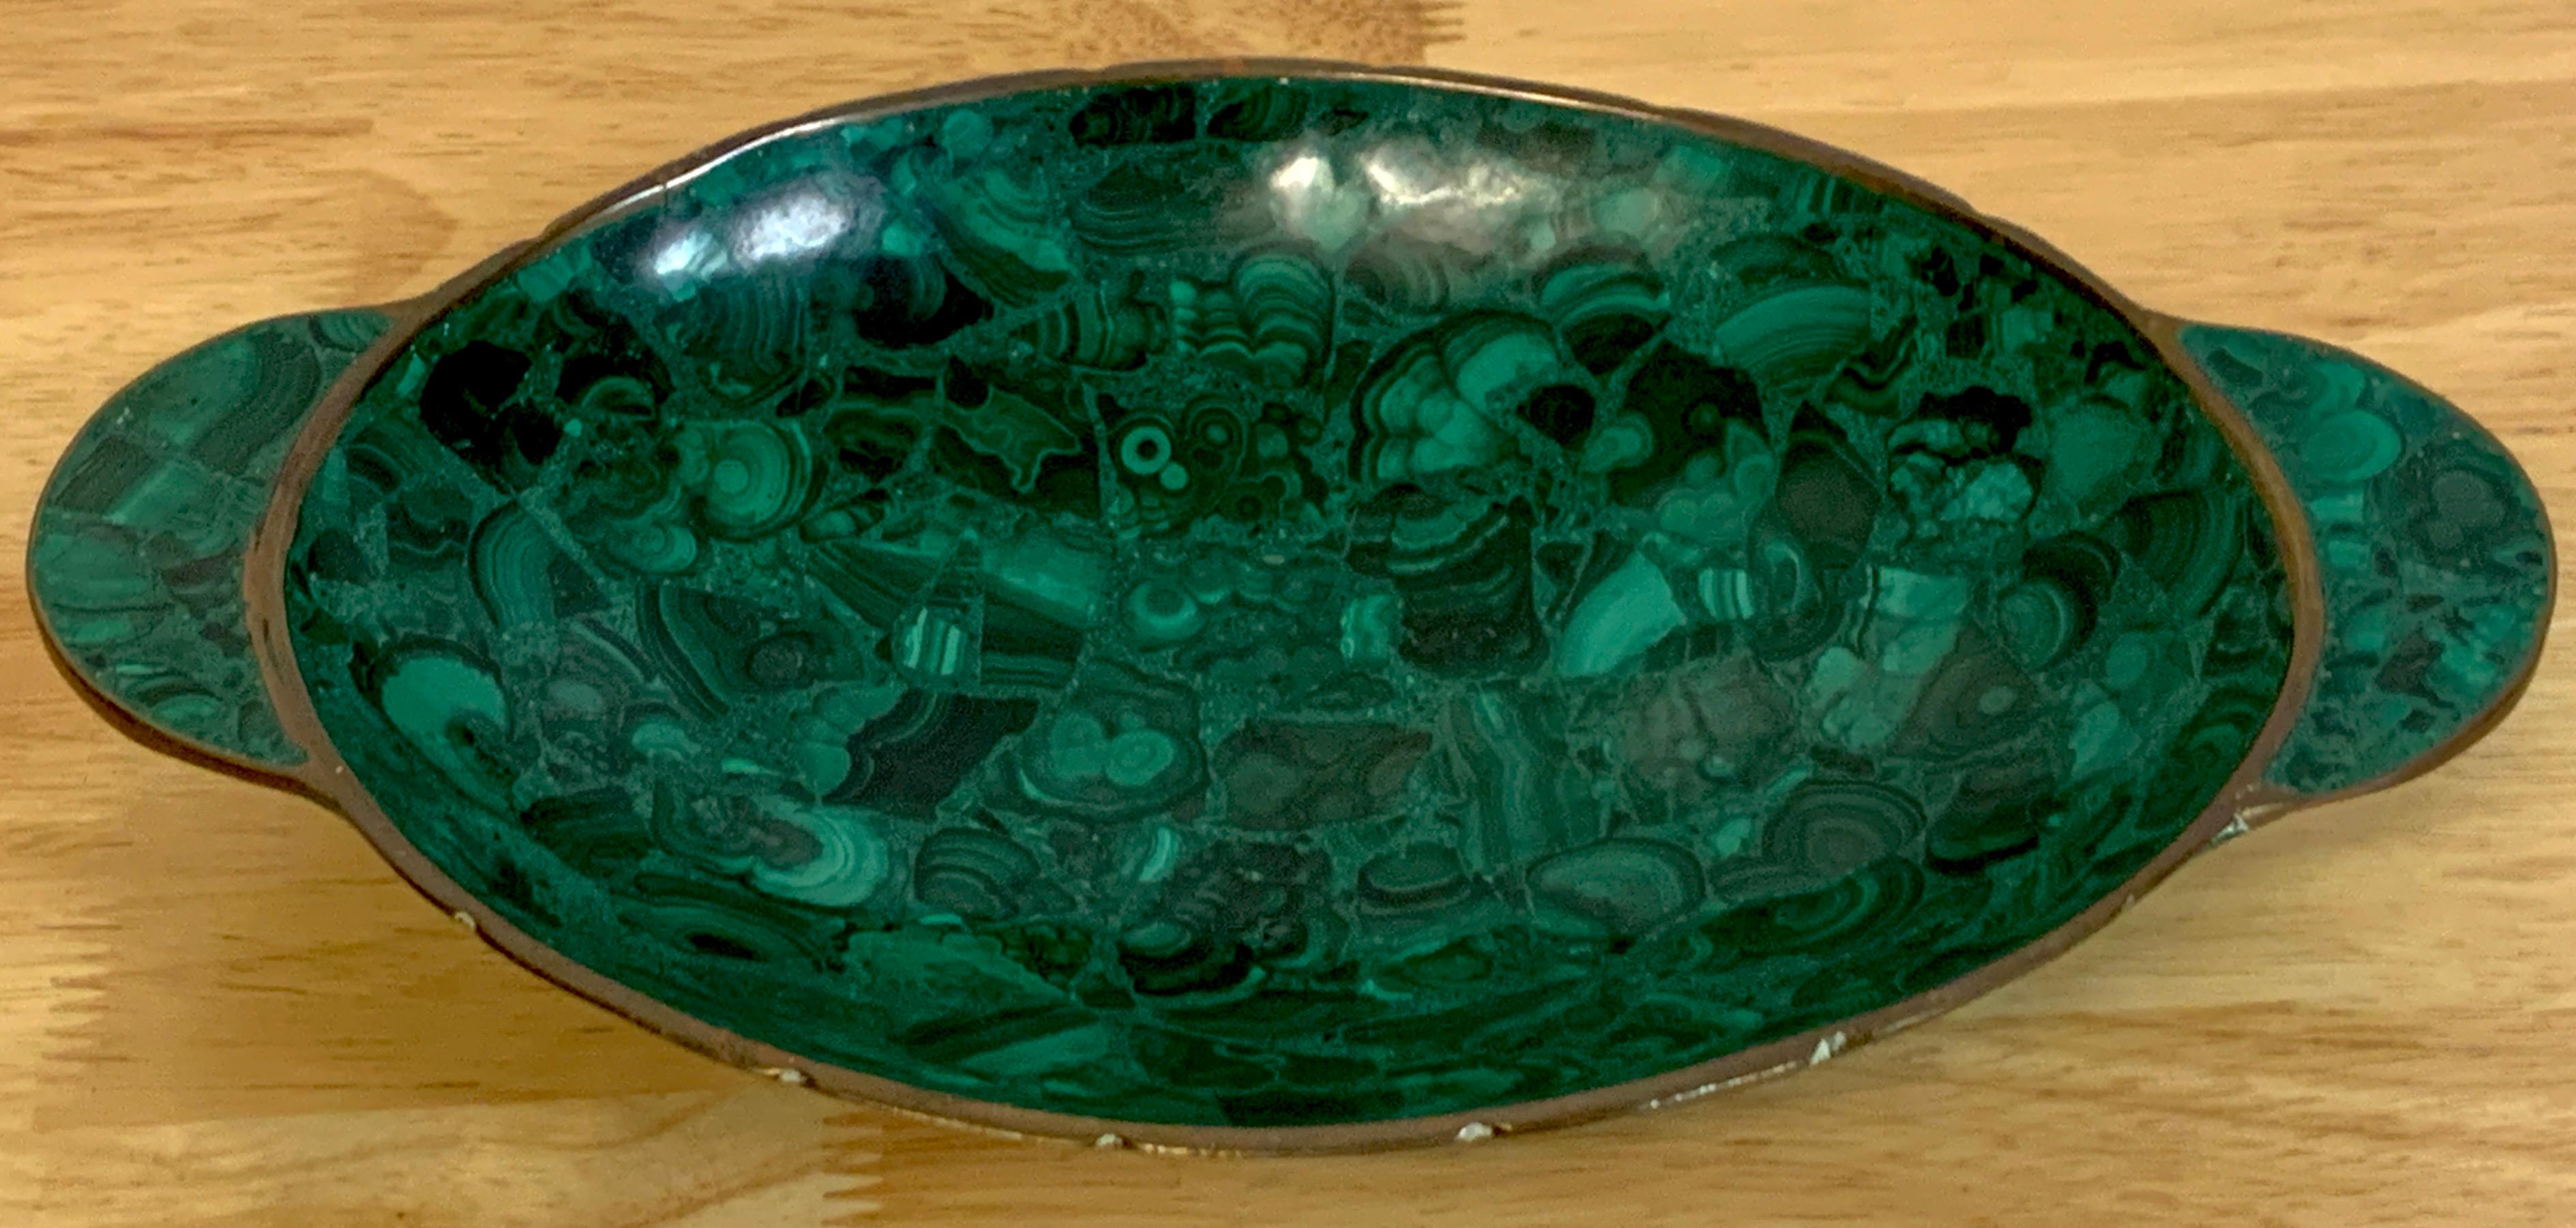 French Modern Bronze & Malachite Clad Vide-Poche, With exquisite all over book-matched malachite veneer on a oval bronze bowl with twin handles. Unmarked
The interior bowl measures 7.5